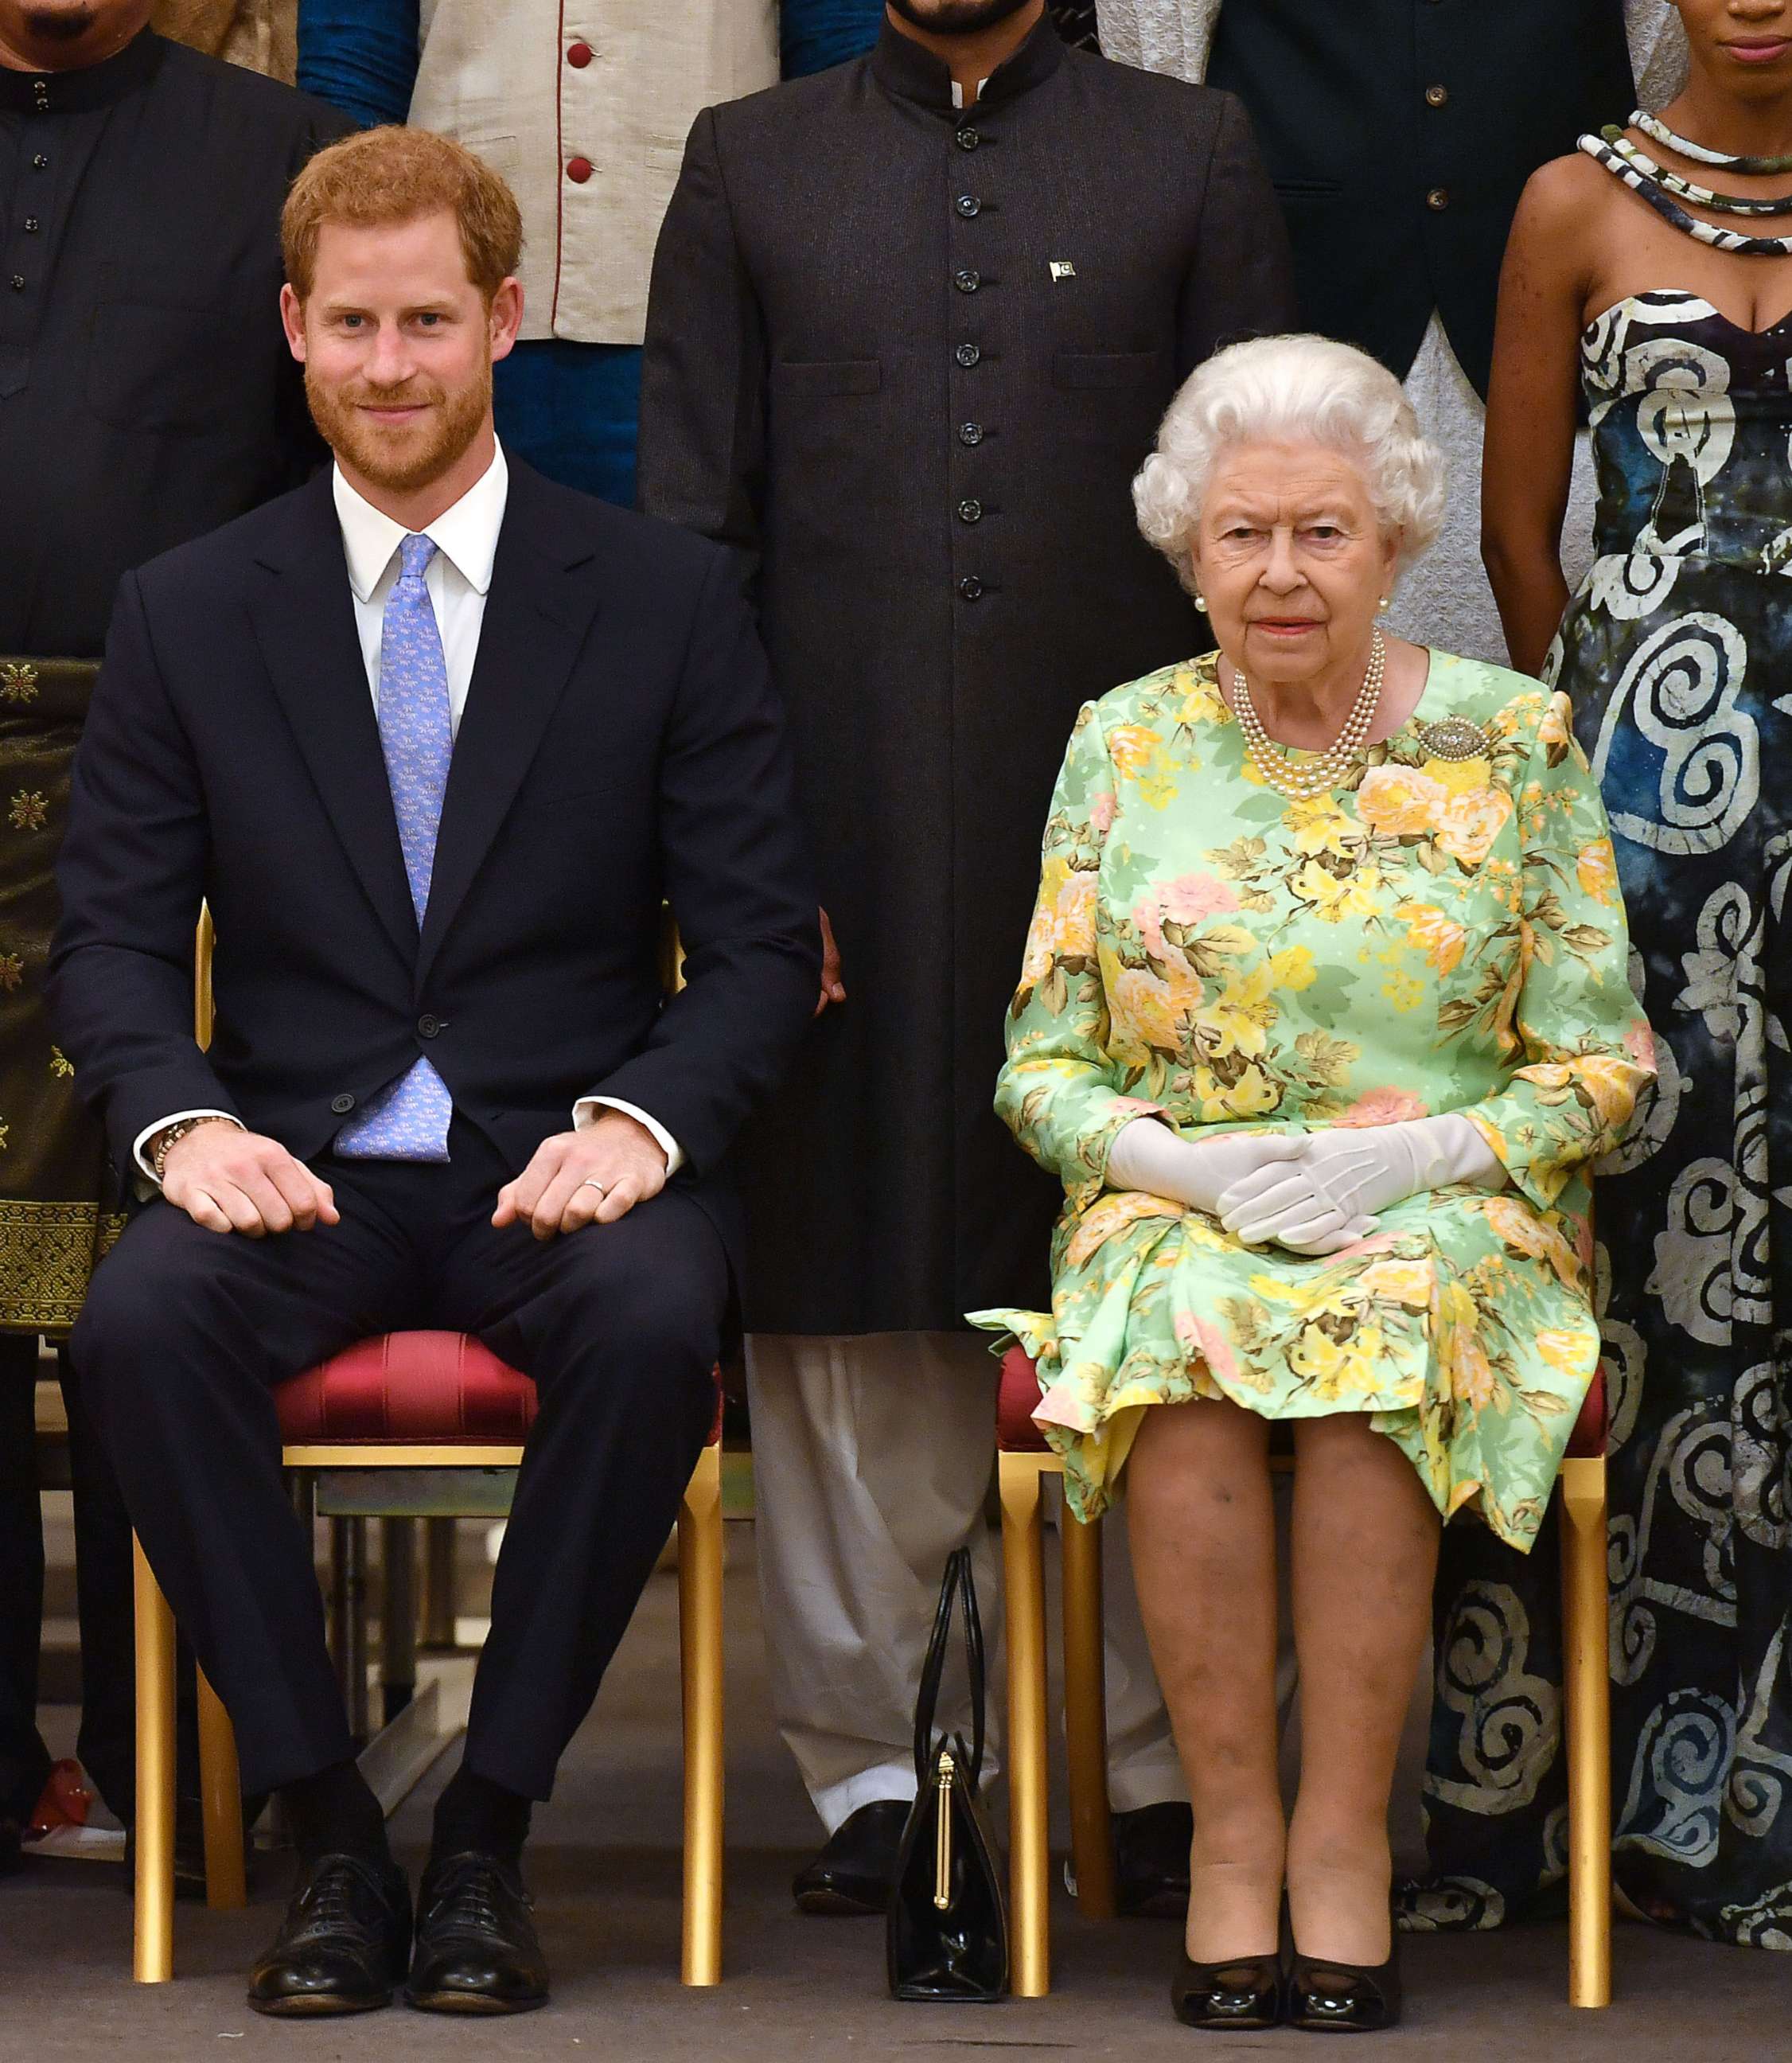 PHOTO: Prince Harry, Duke of Sussex and Queen Elizabeth II at the Queen's Young Leaders Awards Ceremony at Buckingham Palace on June 26, 2018 in London.